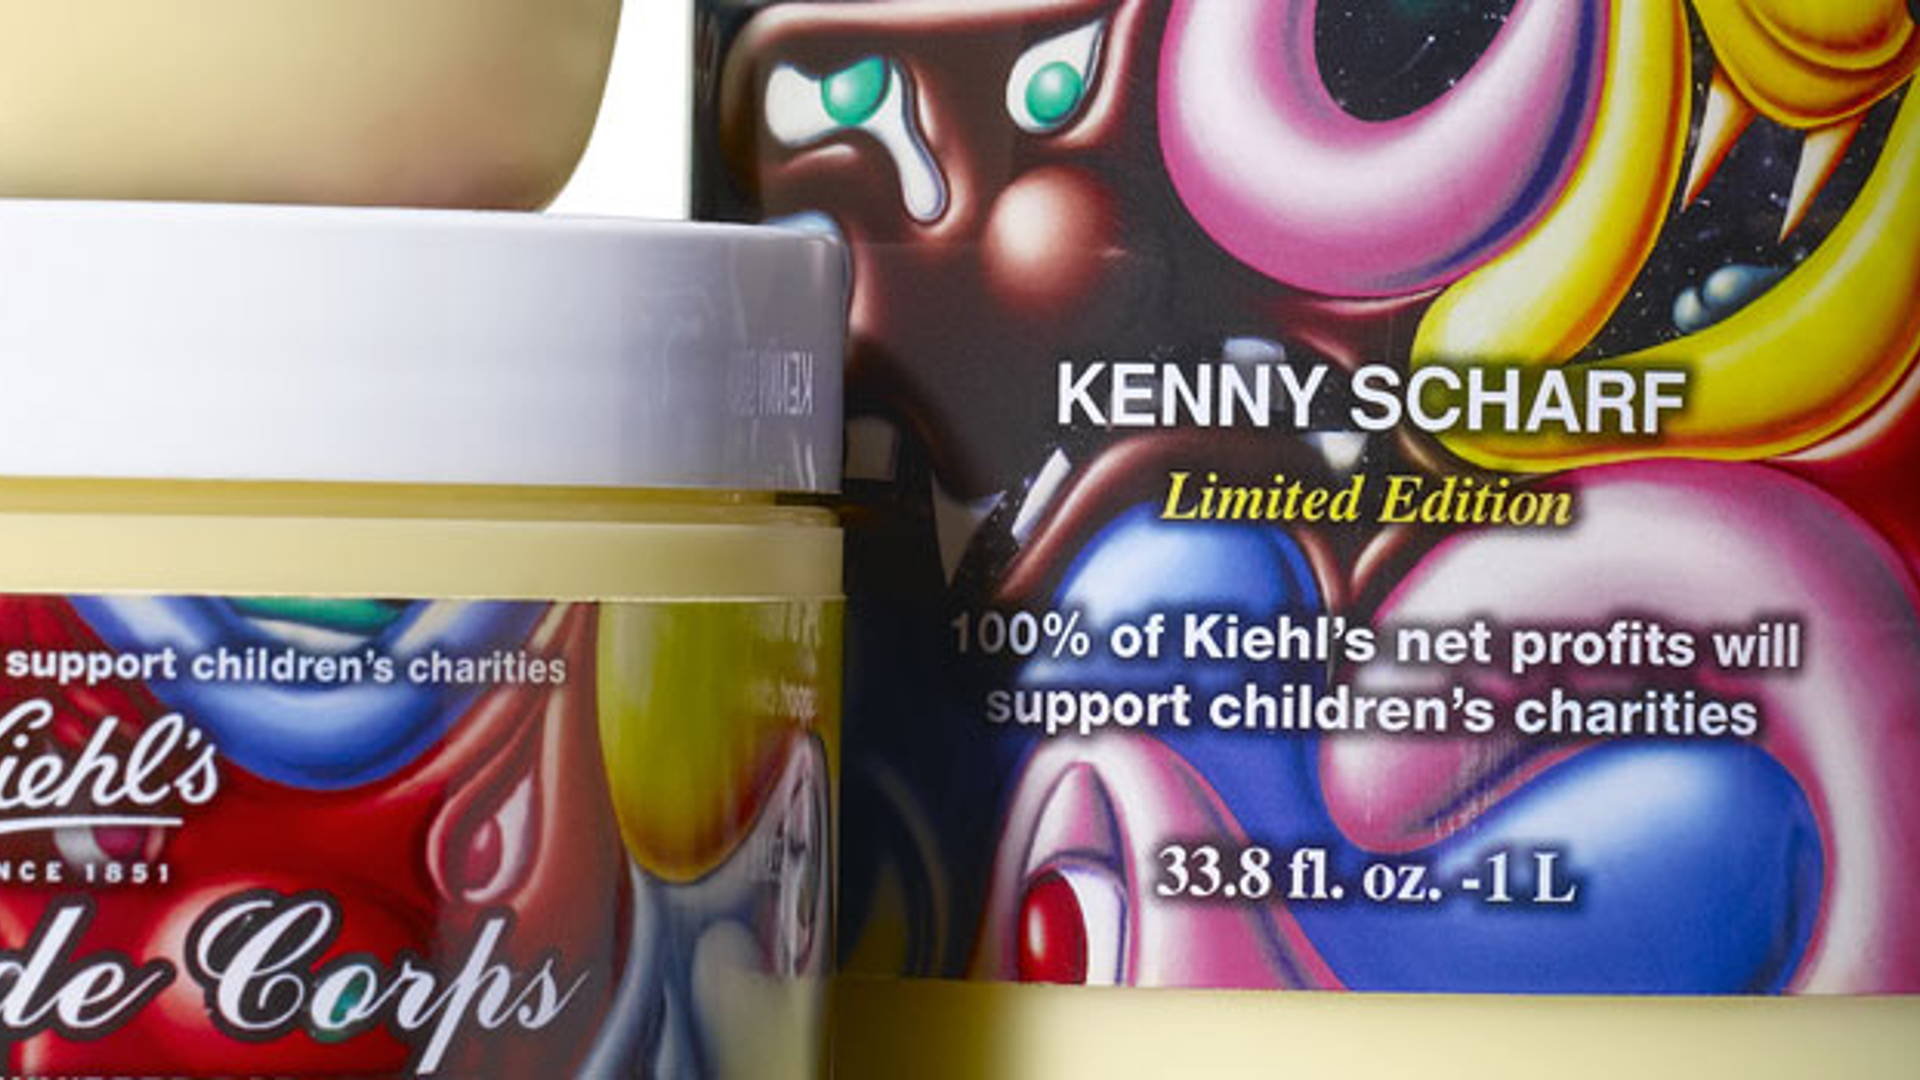 Featured image for Kiehl's Holiday Collection 2012 with Kenny Scharf